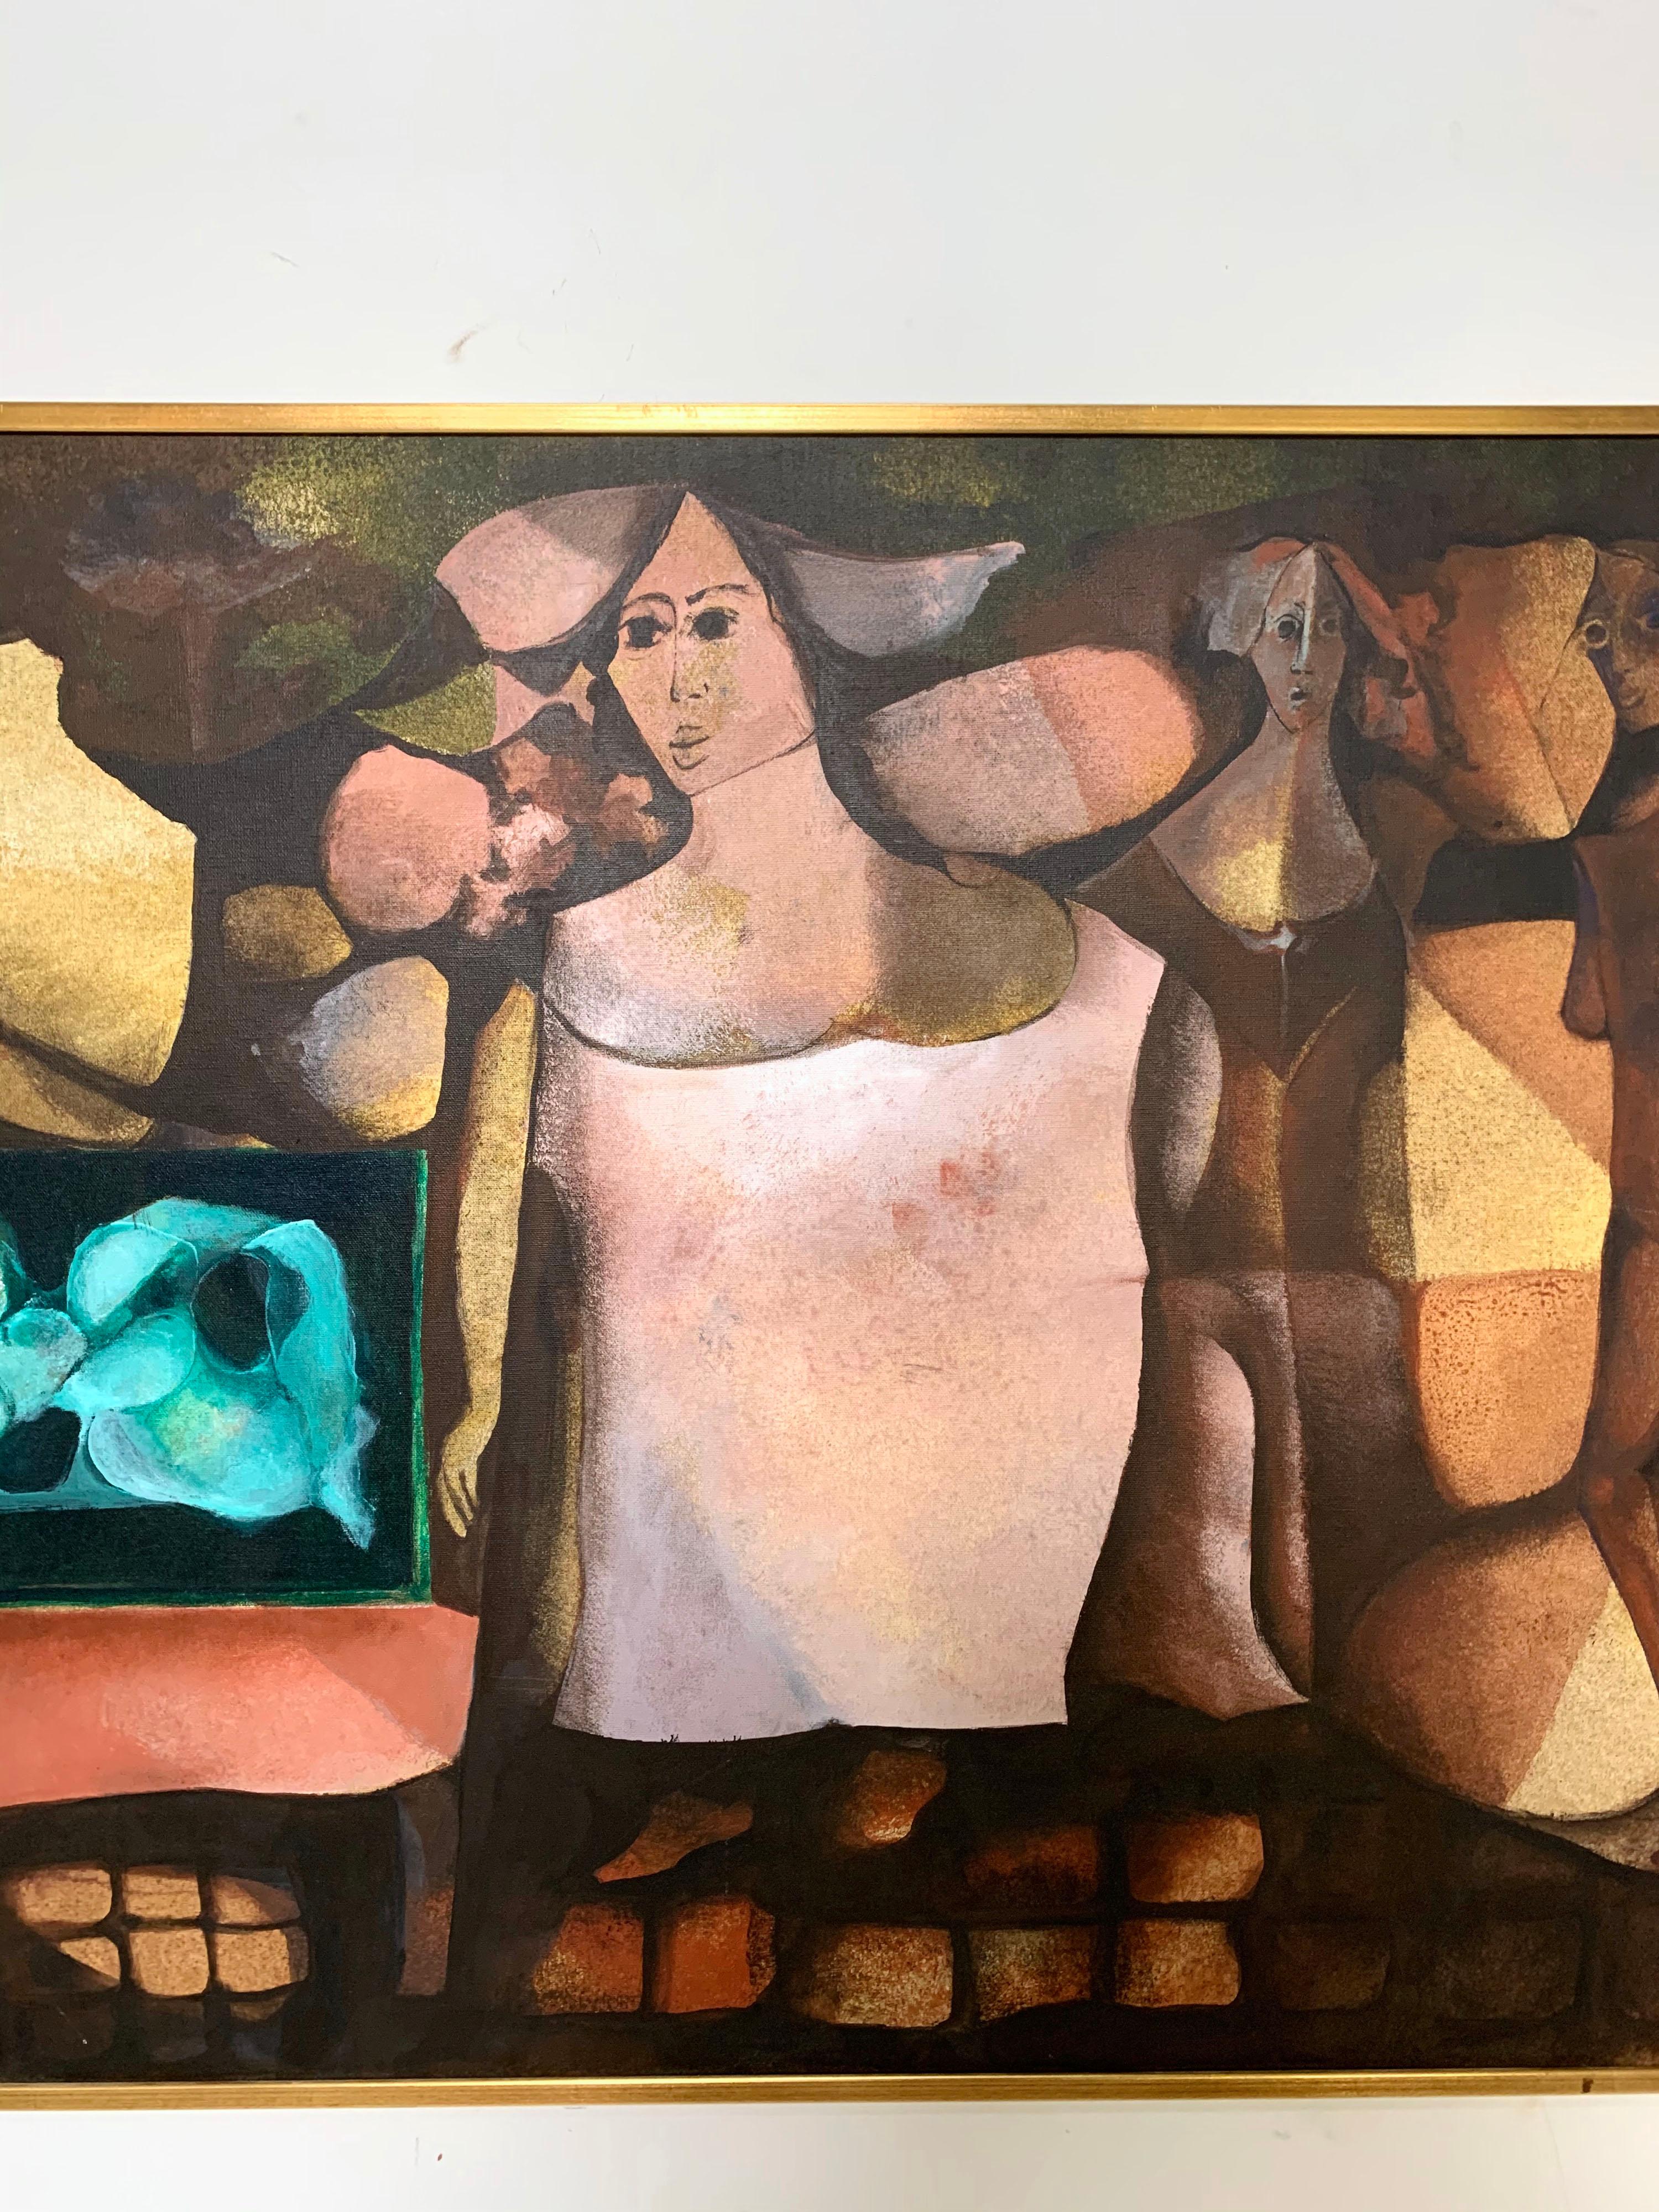 A large scale abstract figurative painting, oil on canvas, by the Uruguayan artist Carlos Perez Franco (1929-2015). Perez Franco exhibited throughout North and South America from the 1960s until earlier this century, and participated in many